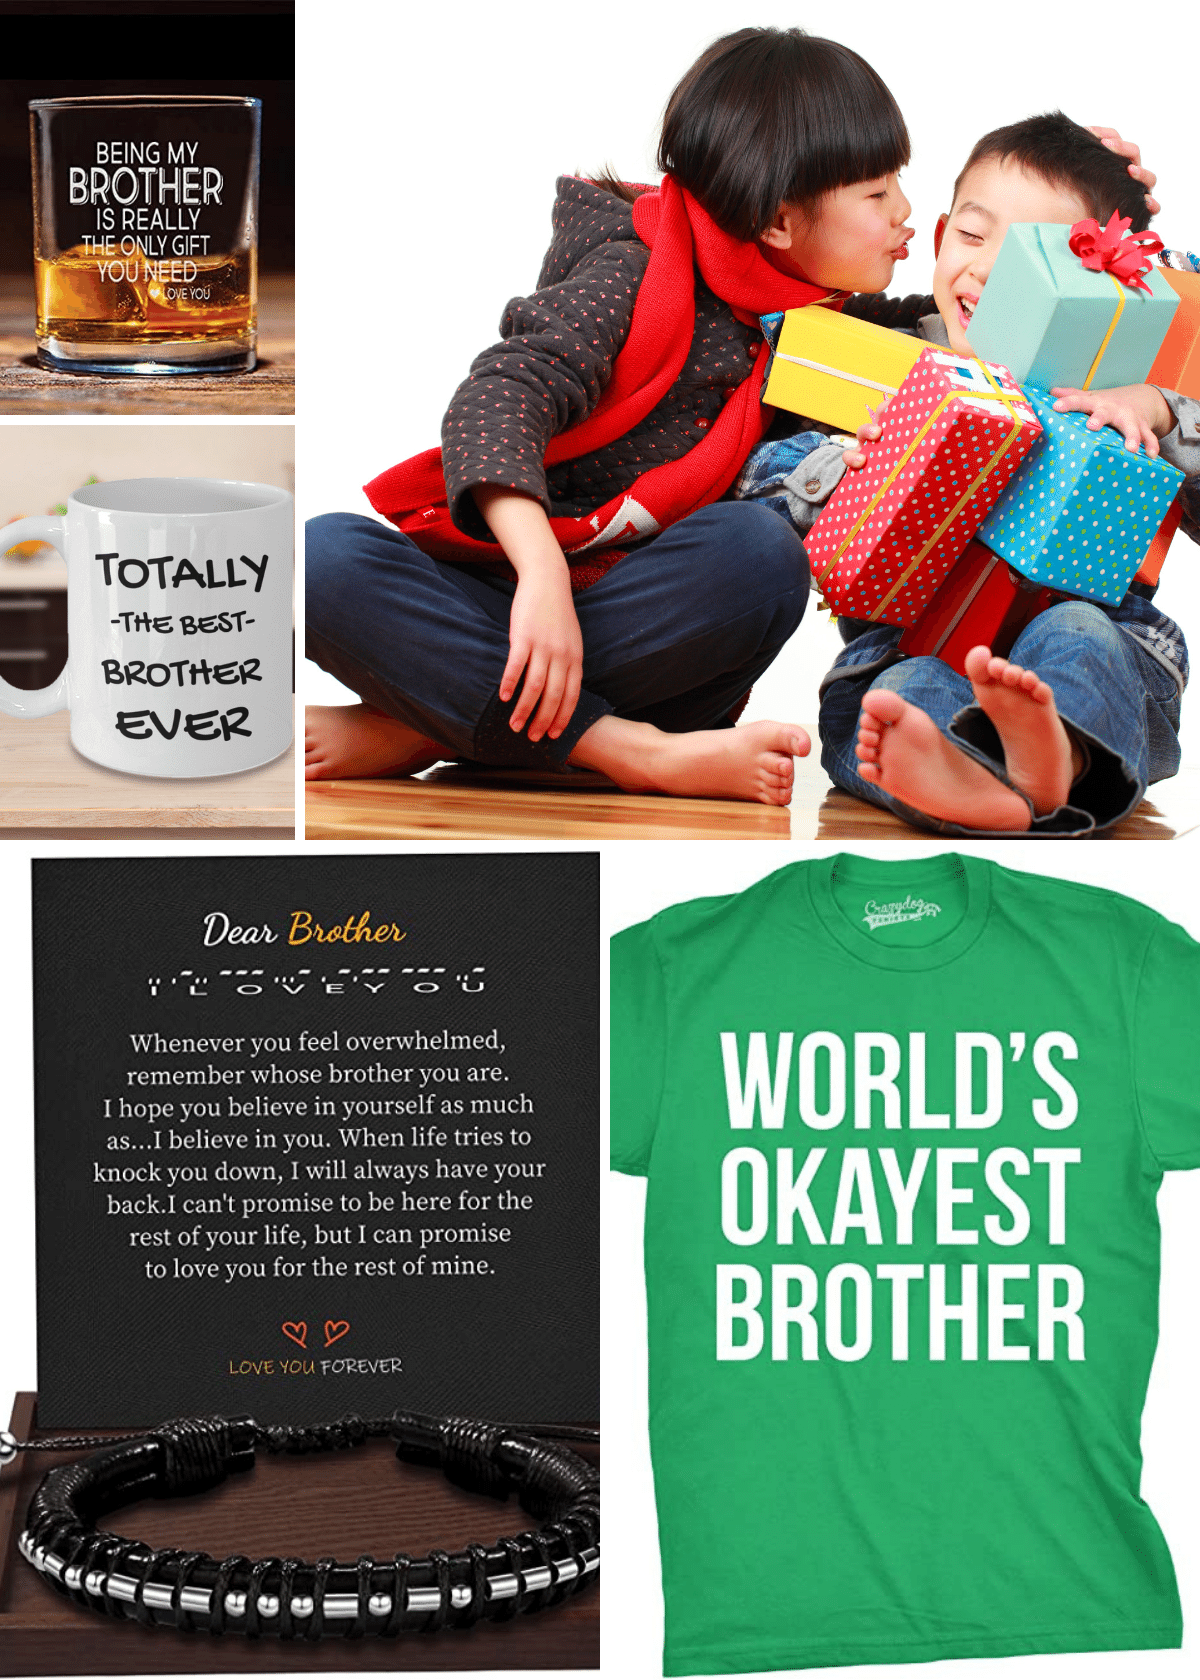 The Best Birthday Gifts for Brother